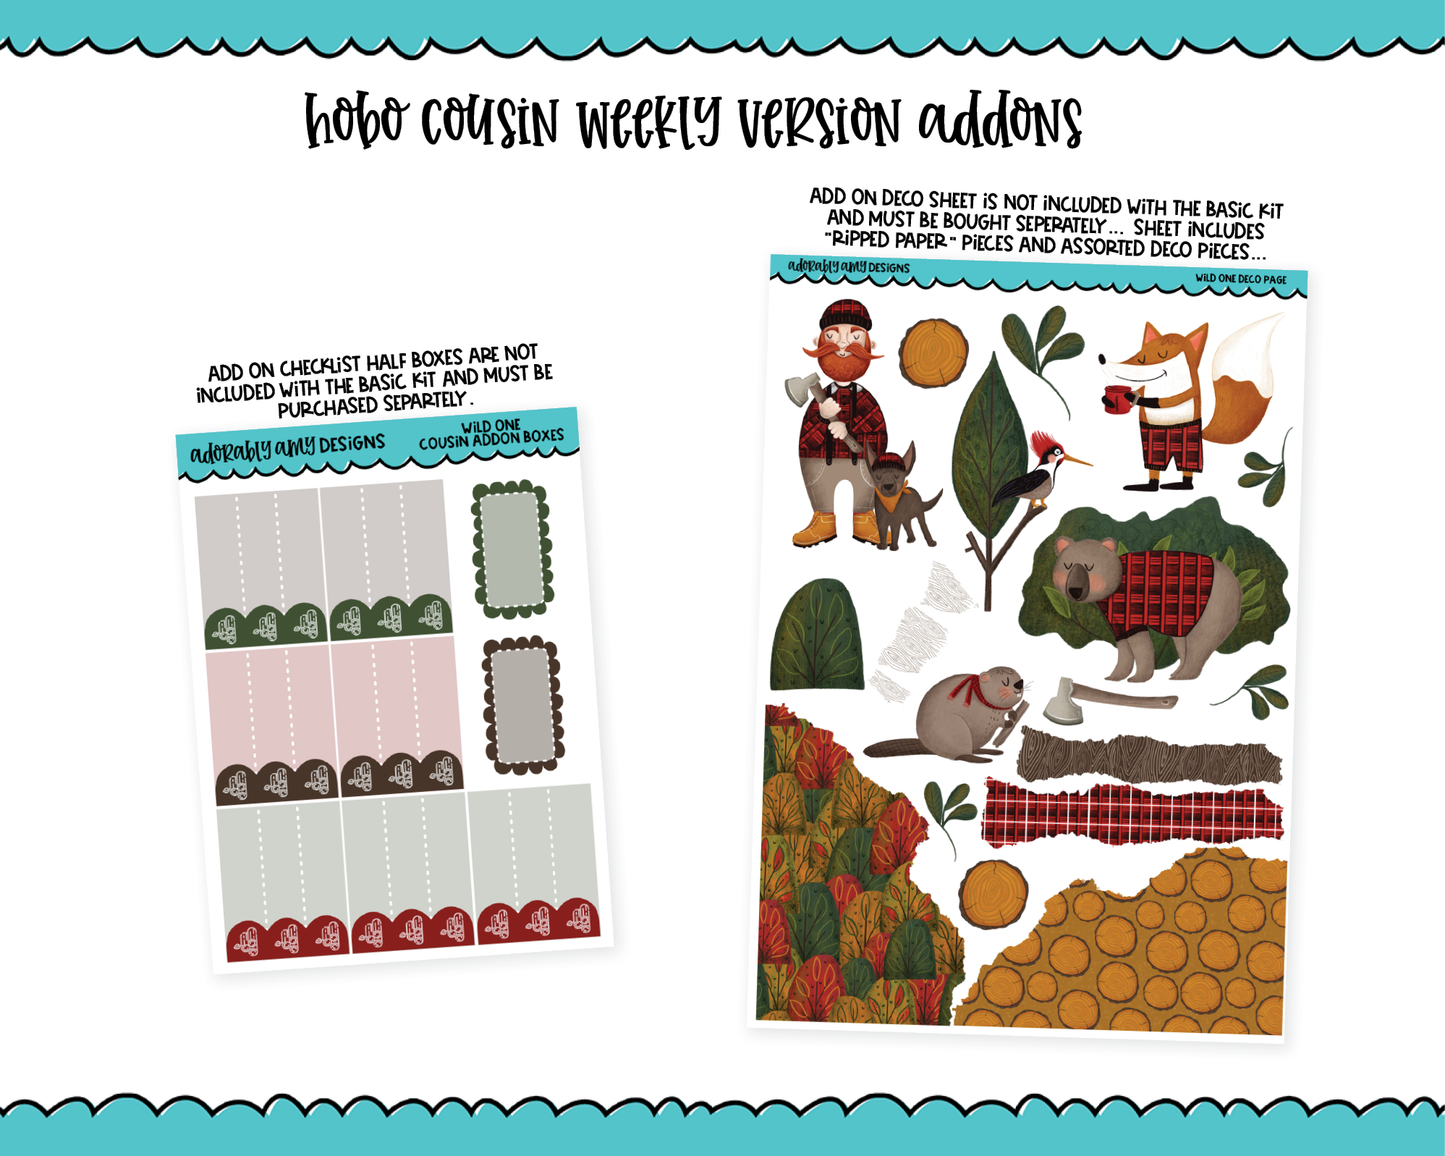 Hobonichi Cousin Weekly Wild One Fall Lumberjack Themed Planner Sticker Kit for Hobo Cousin or Similar Planners